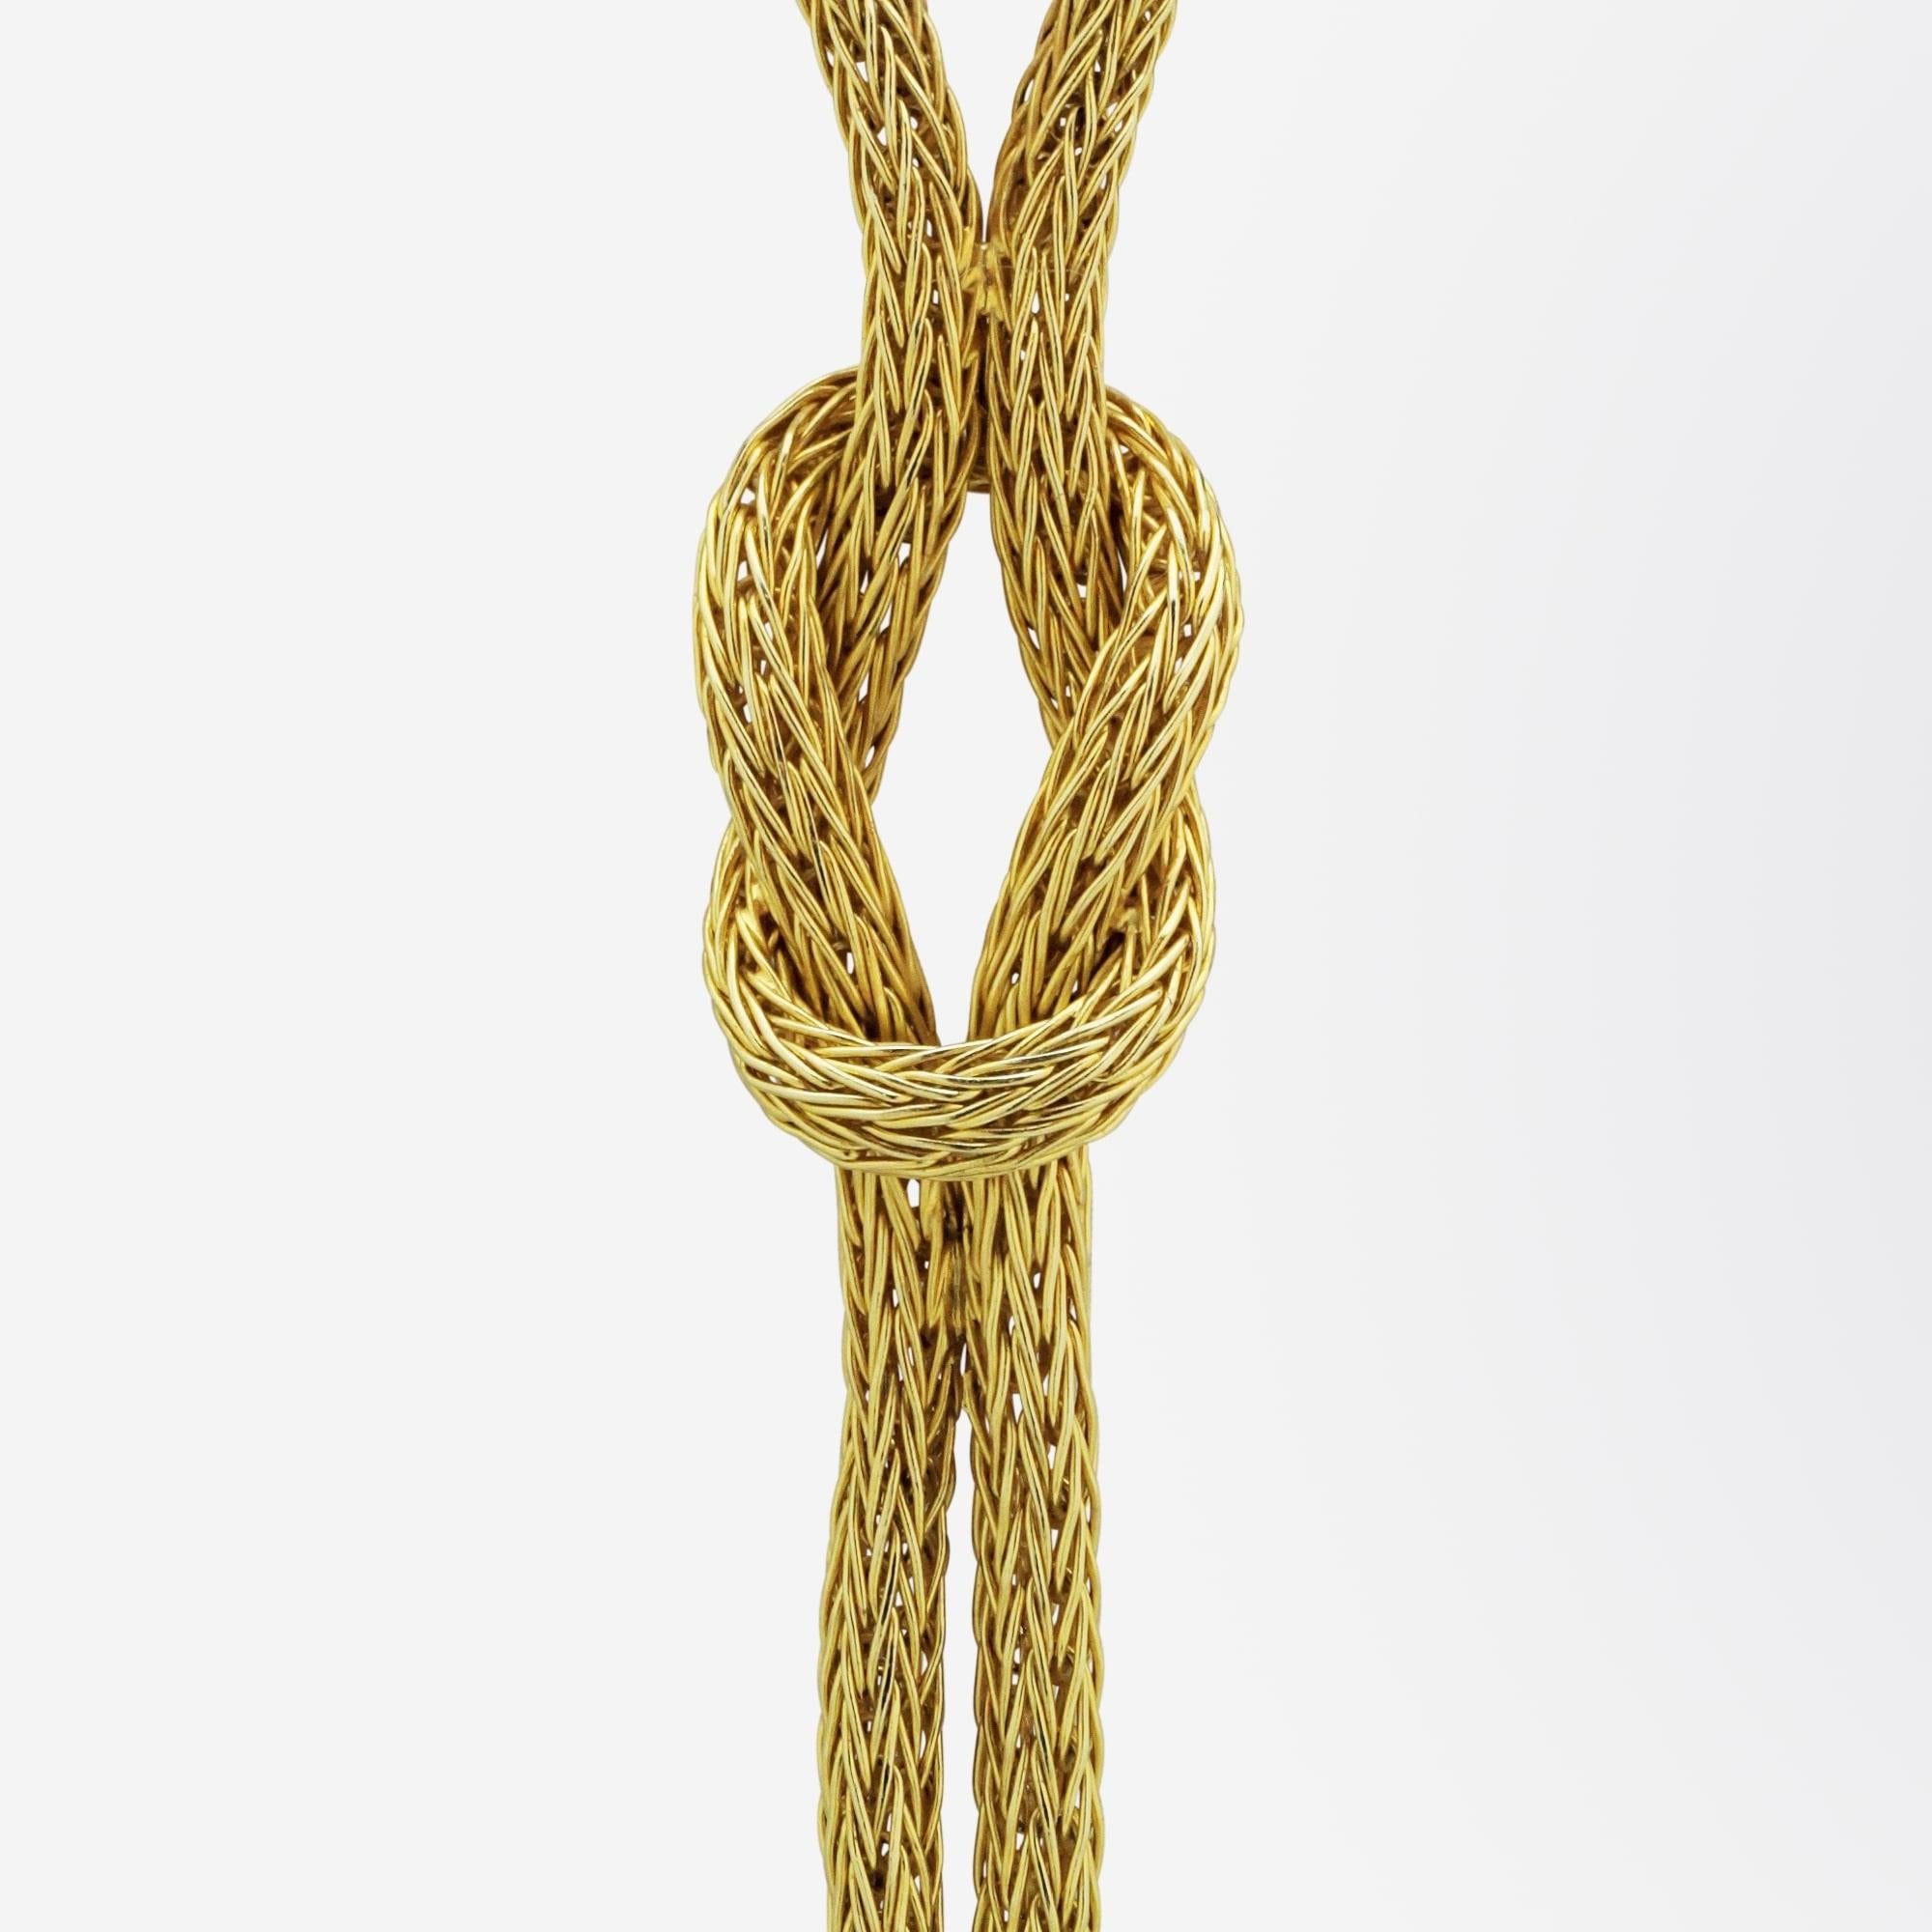 An exceptional lariat style necklace in solid 18 karat yellow gold. The necklace has been manufactured of woven 18 karat yellow gold 'rope' which centres on a 'lovers knot' drop from which hang two Etruscan Revival pendants with tassels. The weave